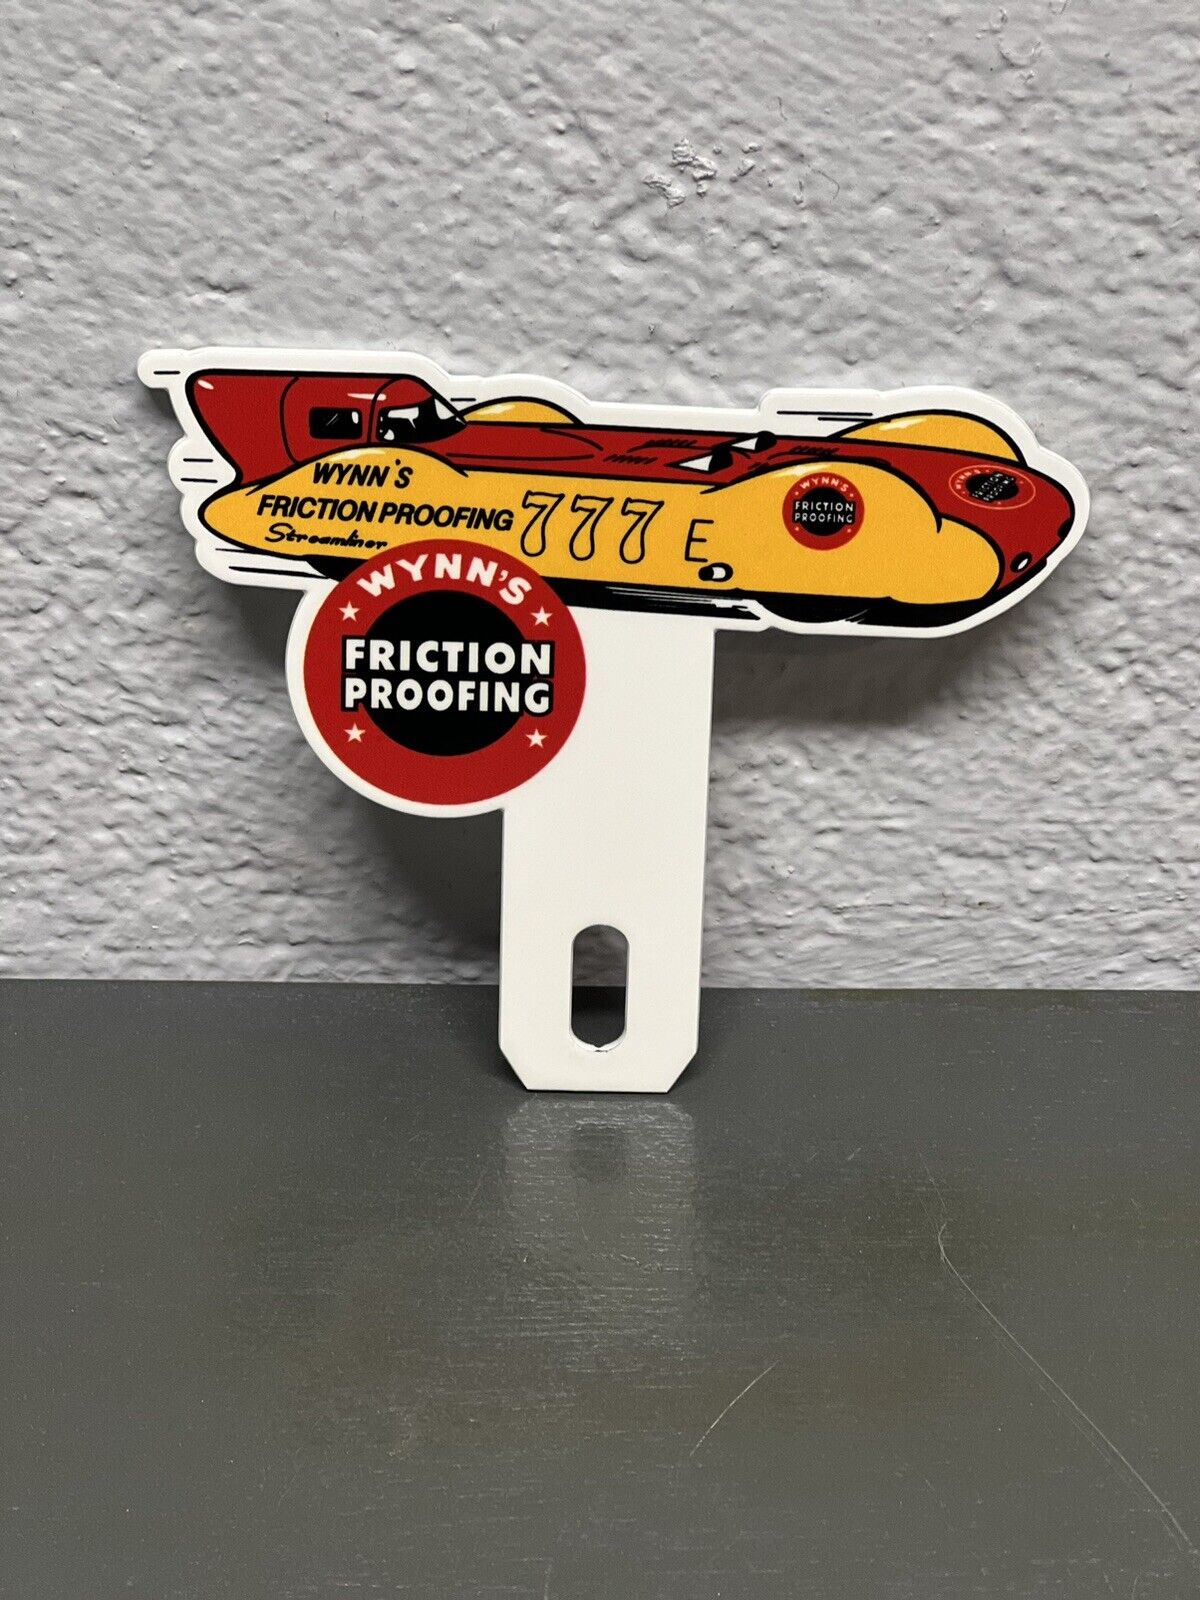 WYNN’S OIL Metal Plate Topper Sign Gas Station Service Friction Proofing Garage